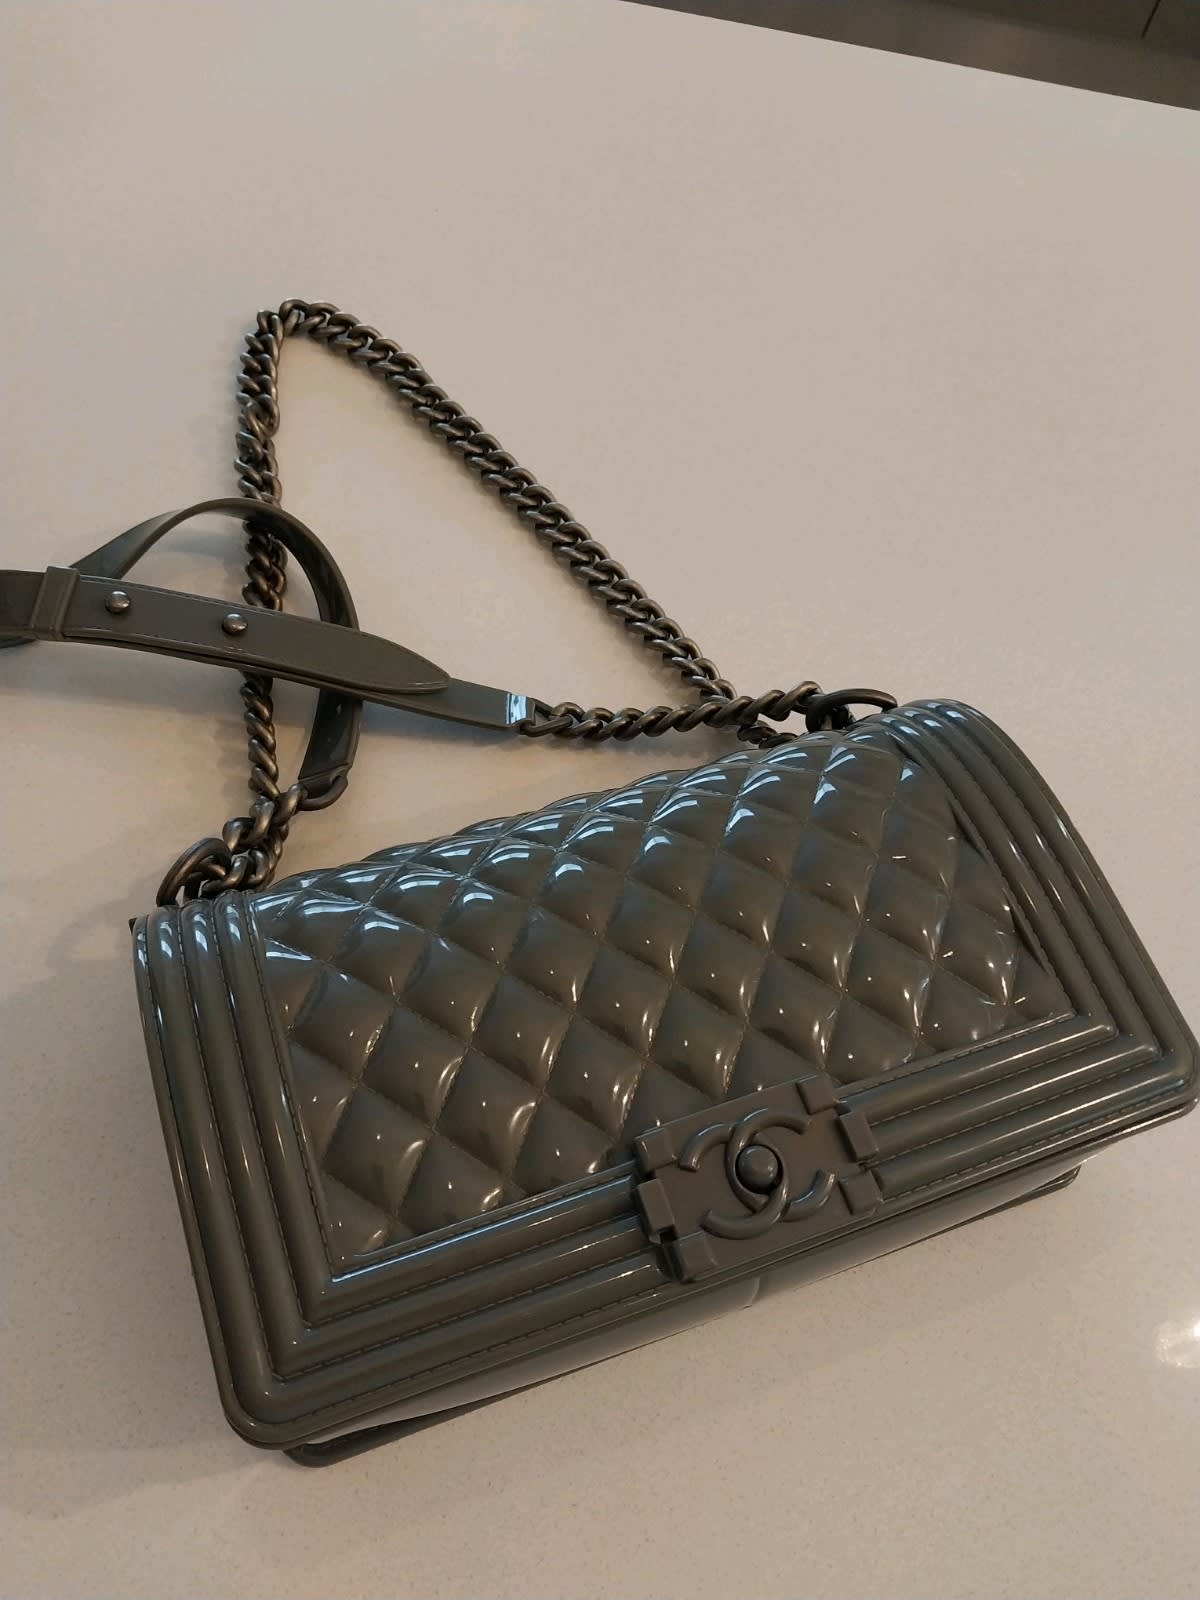 jelly toyboy chanel inspired bag 